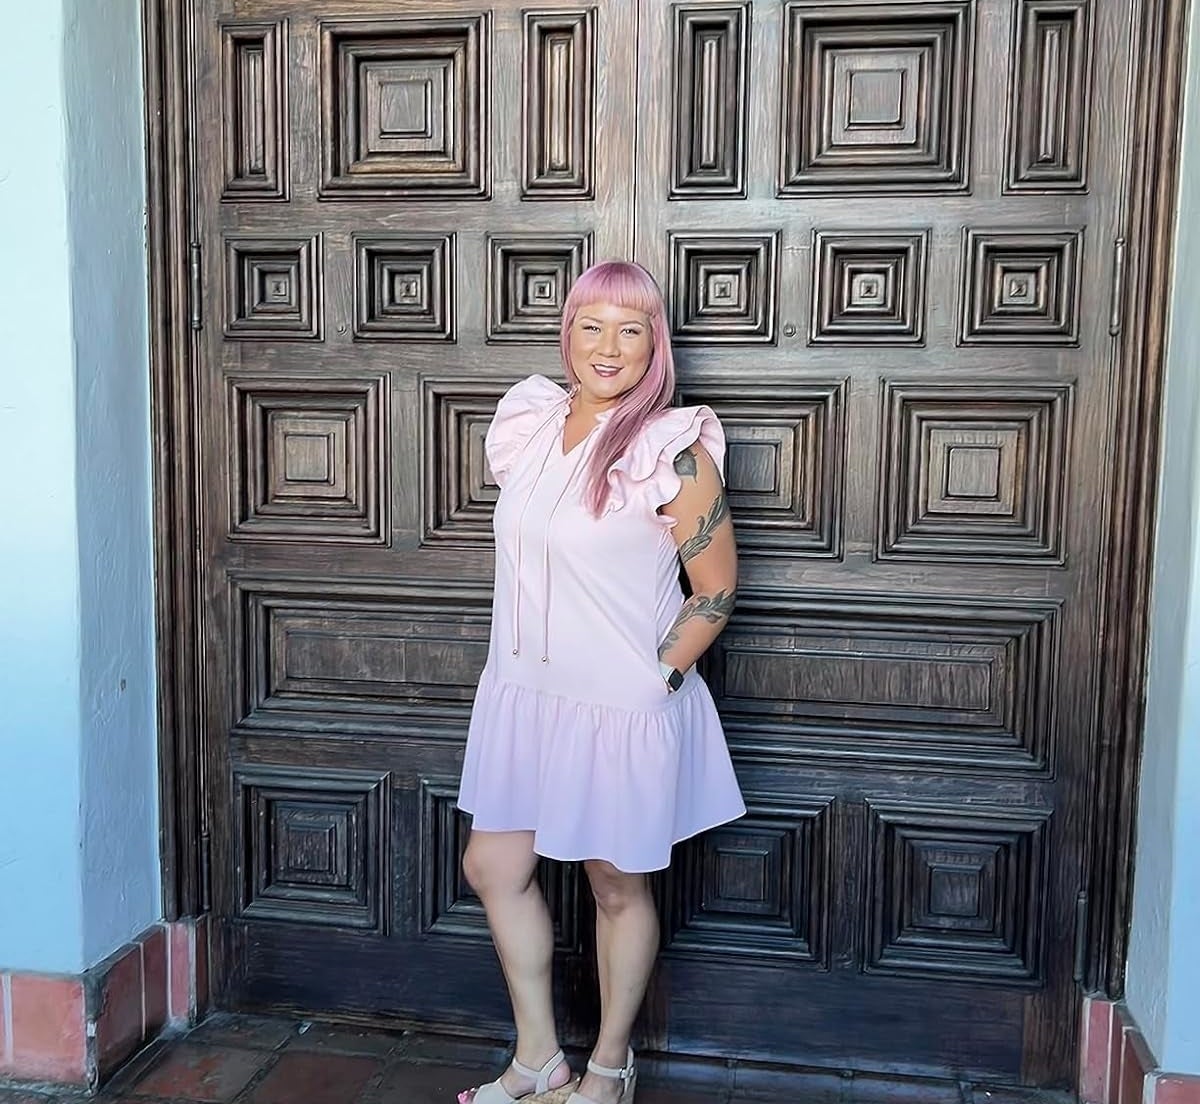 Person in a pink dress with frilled sleeves and sandals stands in front of a large wooden door